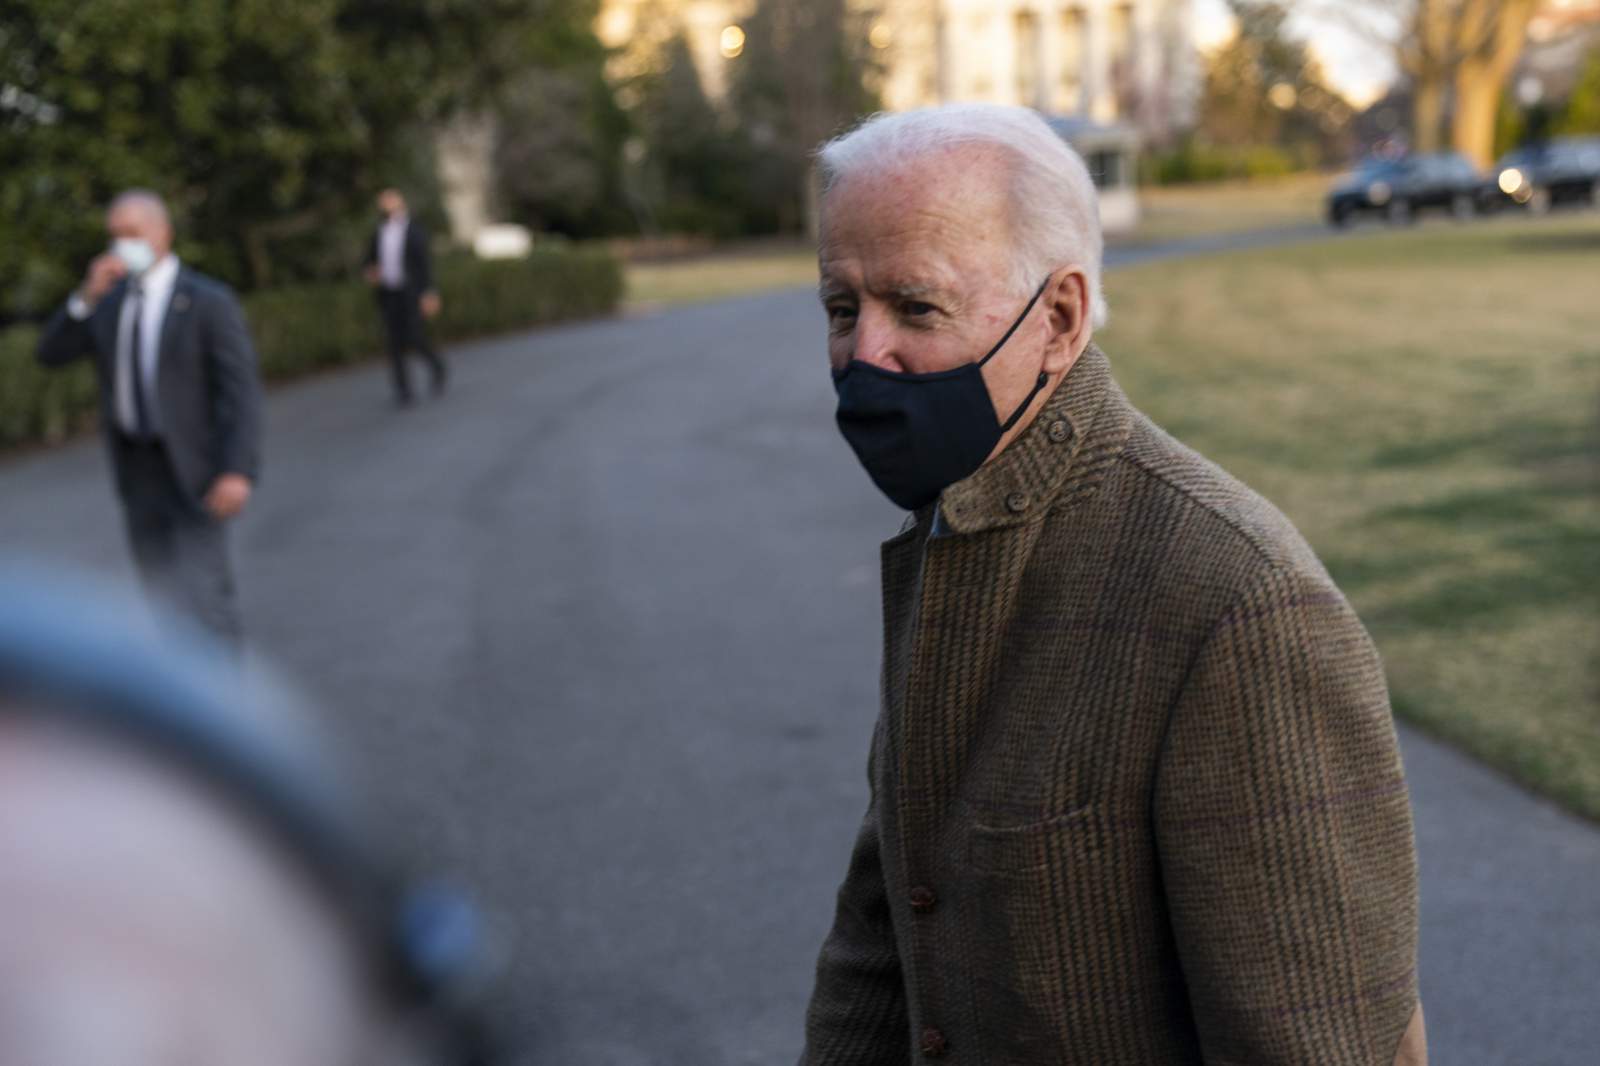 Biden declines to call for Cuomo to resign, awaits probe